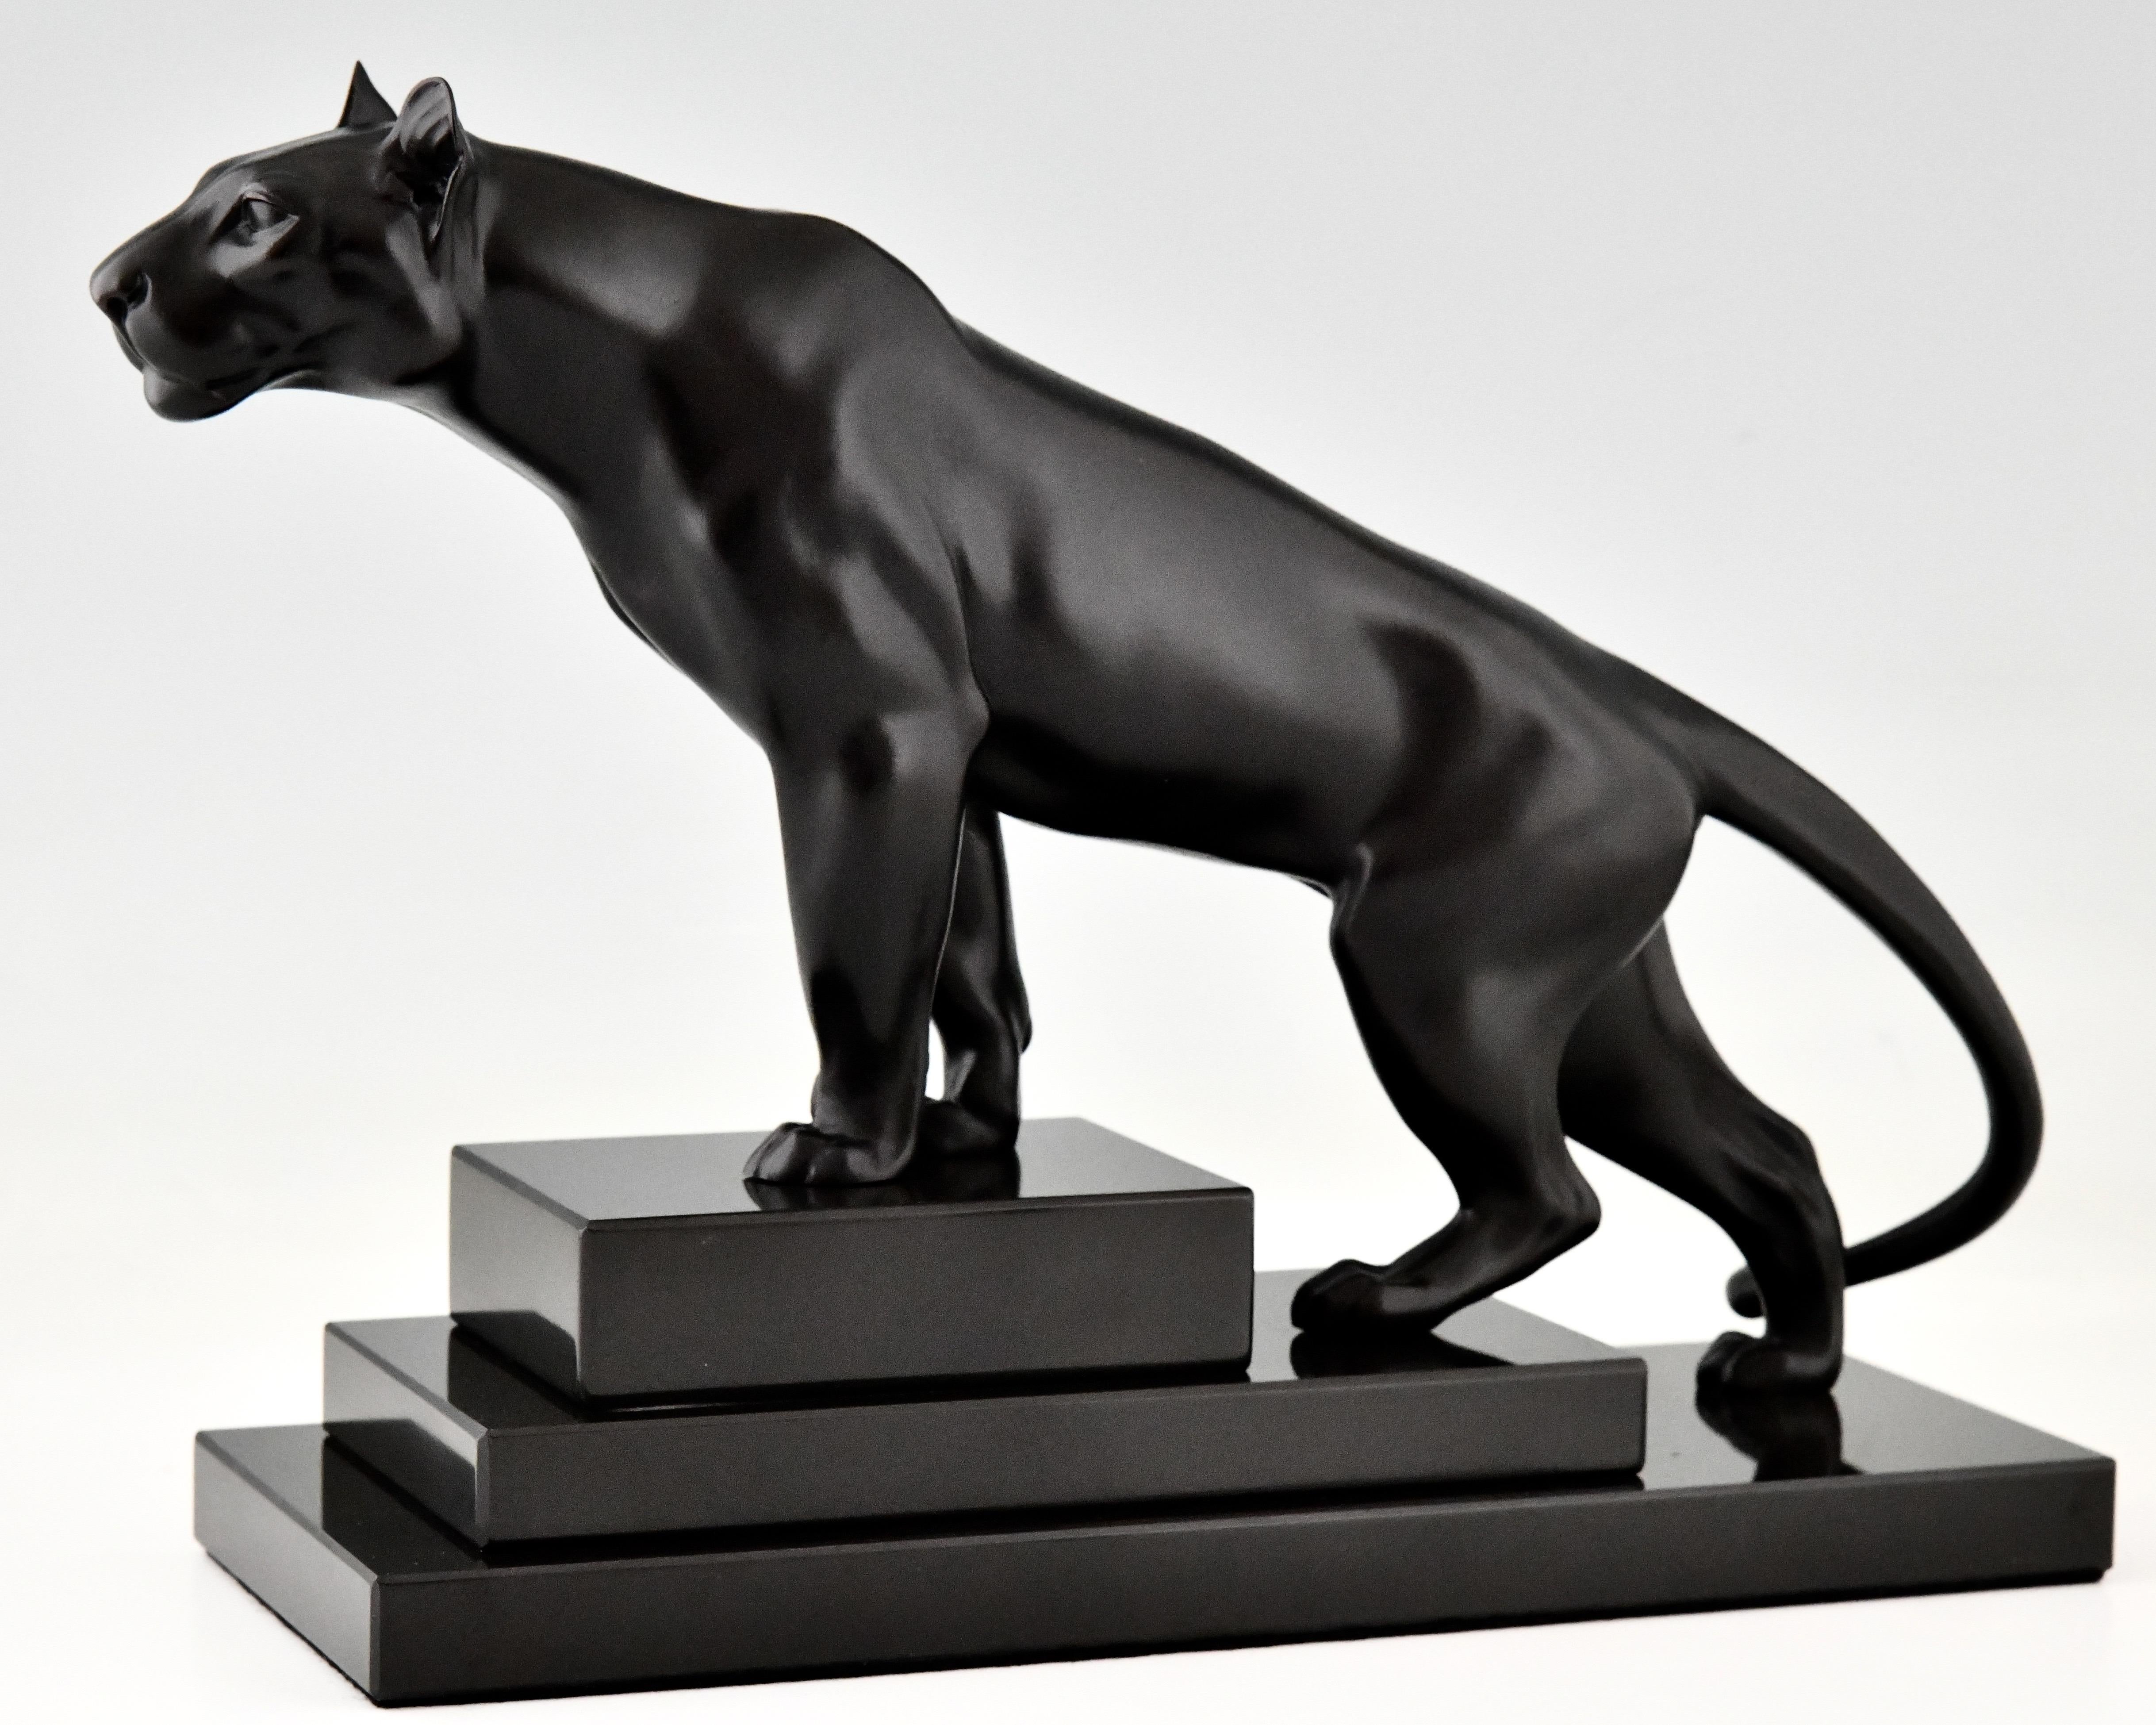 Art Deco style sculpture of a black panther on a stepped marble base by the French artist Max Le Verrier, France. 
With foundry mark. 
Design 1930. Posthumous contemporary cast. 
Handcrafted.  
With Certificate of Authenticity.

Literature on Max Le